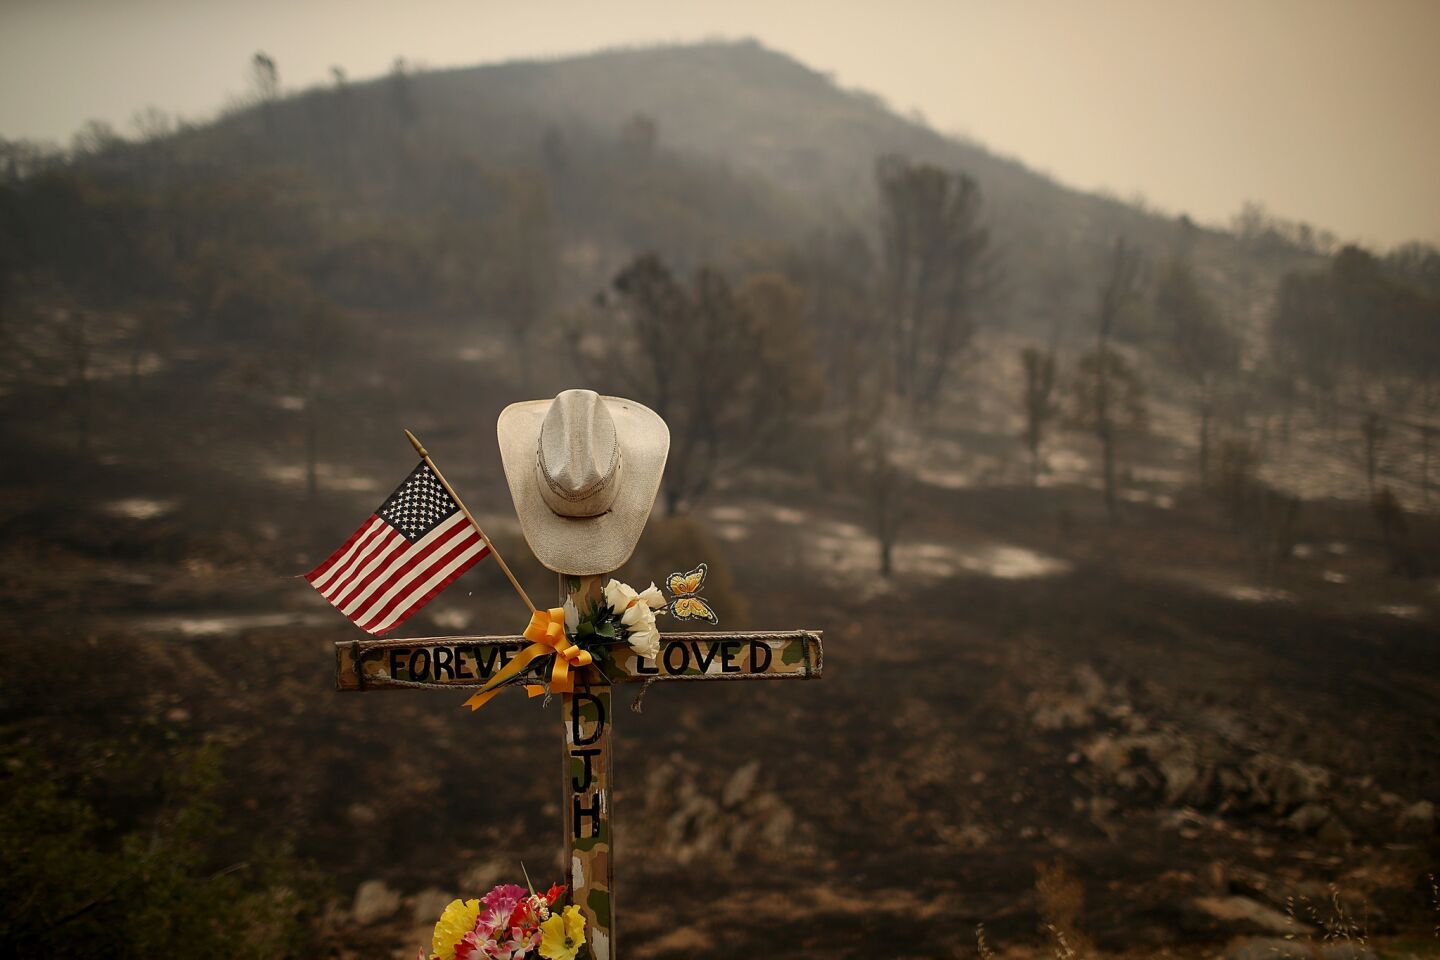 A roadside memorial stands next to an area burned by the Detwiler fire in Mariposa, Calif.